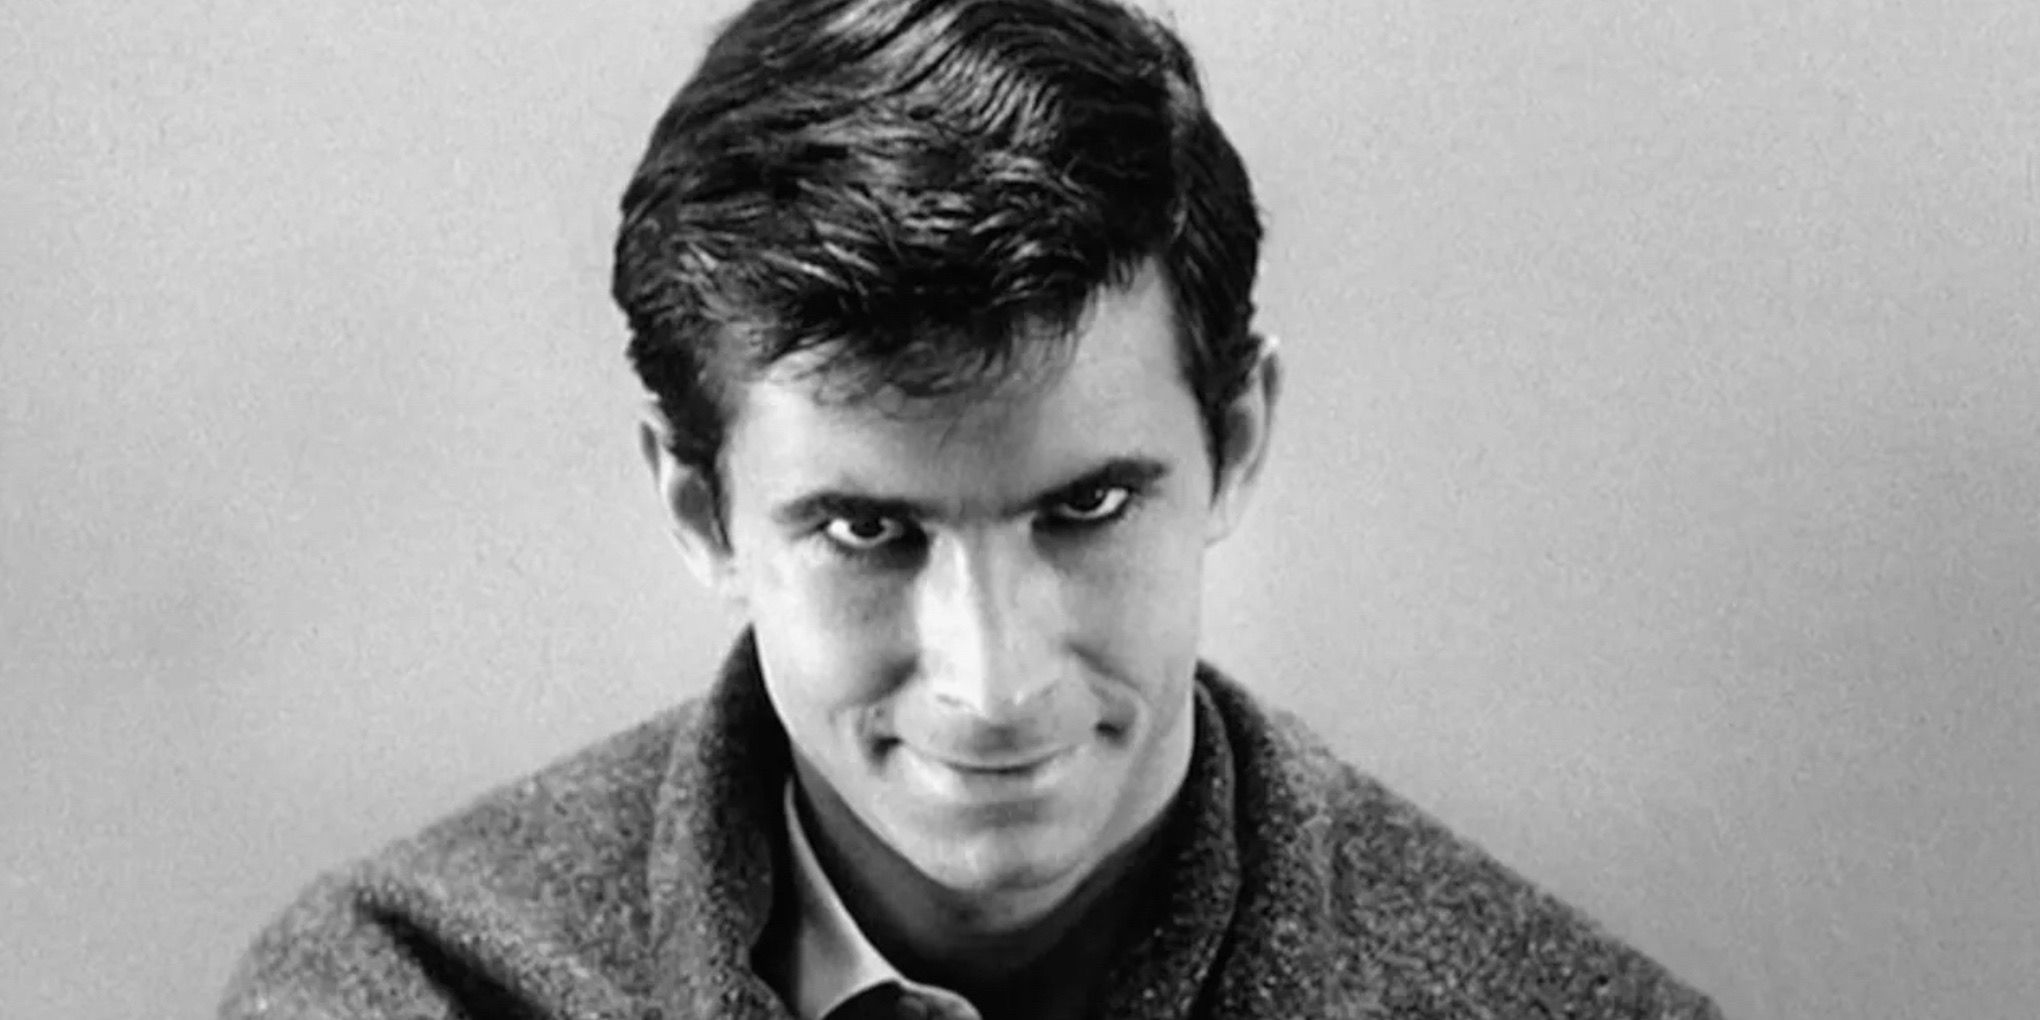 Anthony Perkins as Norman Bates in Psycho (1960)